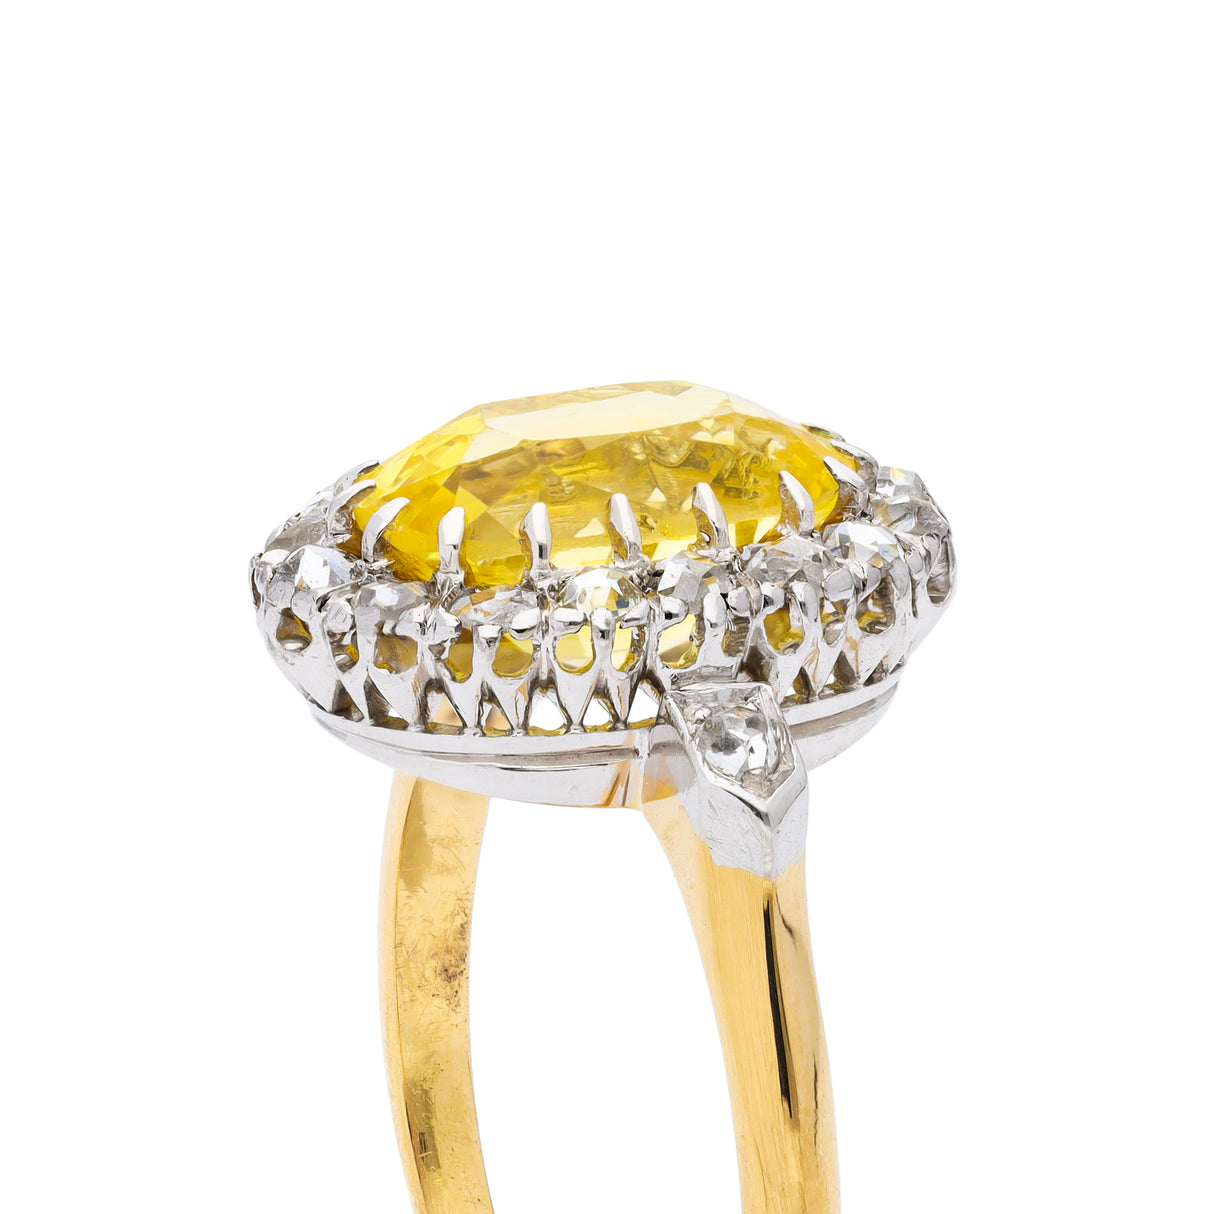 Antique French yellow sapphire & diamond cluster ring, 18ct yellow gold